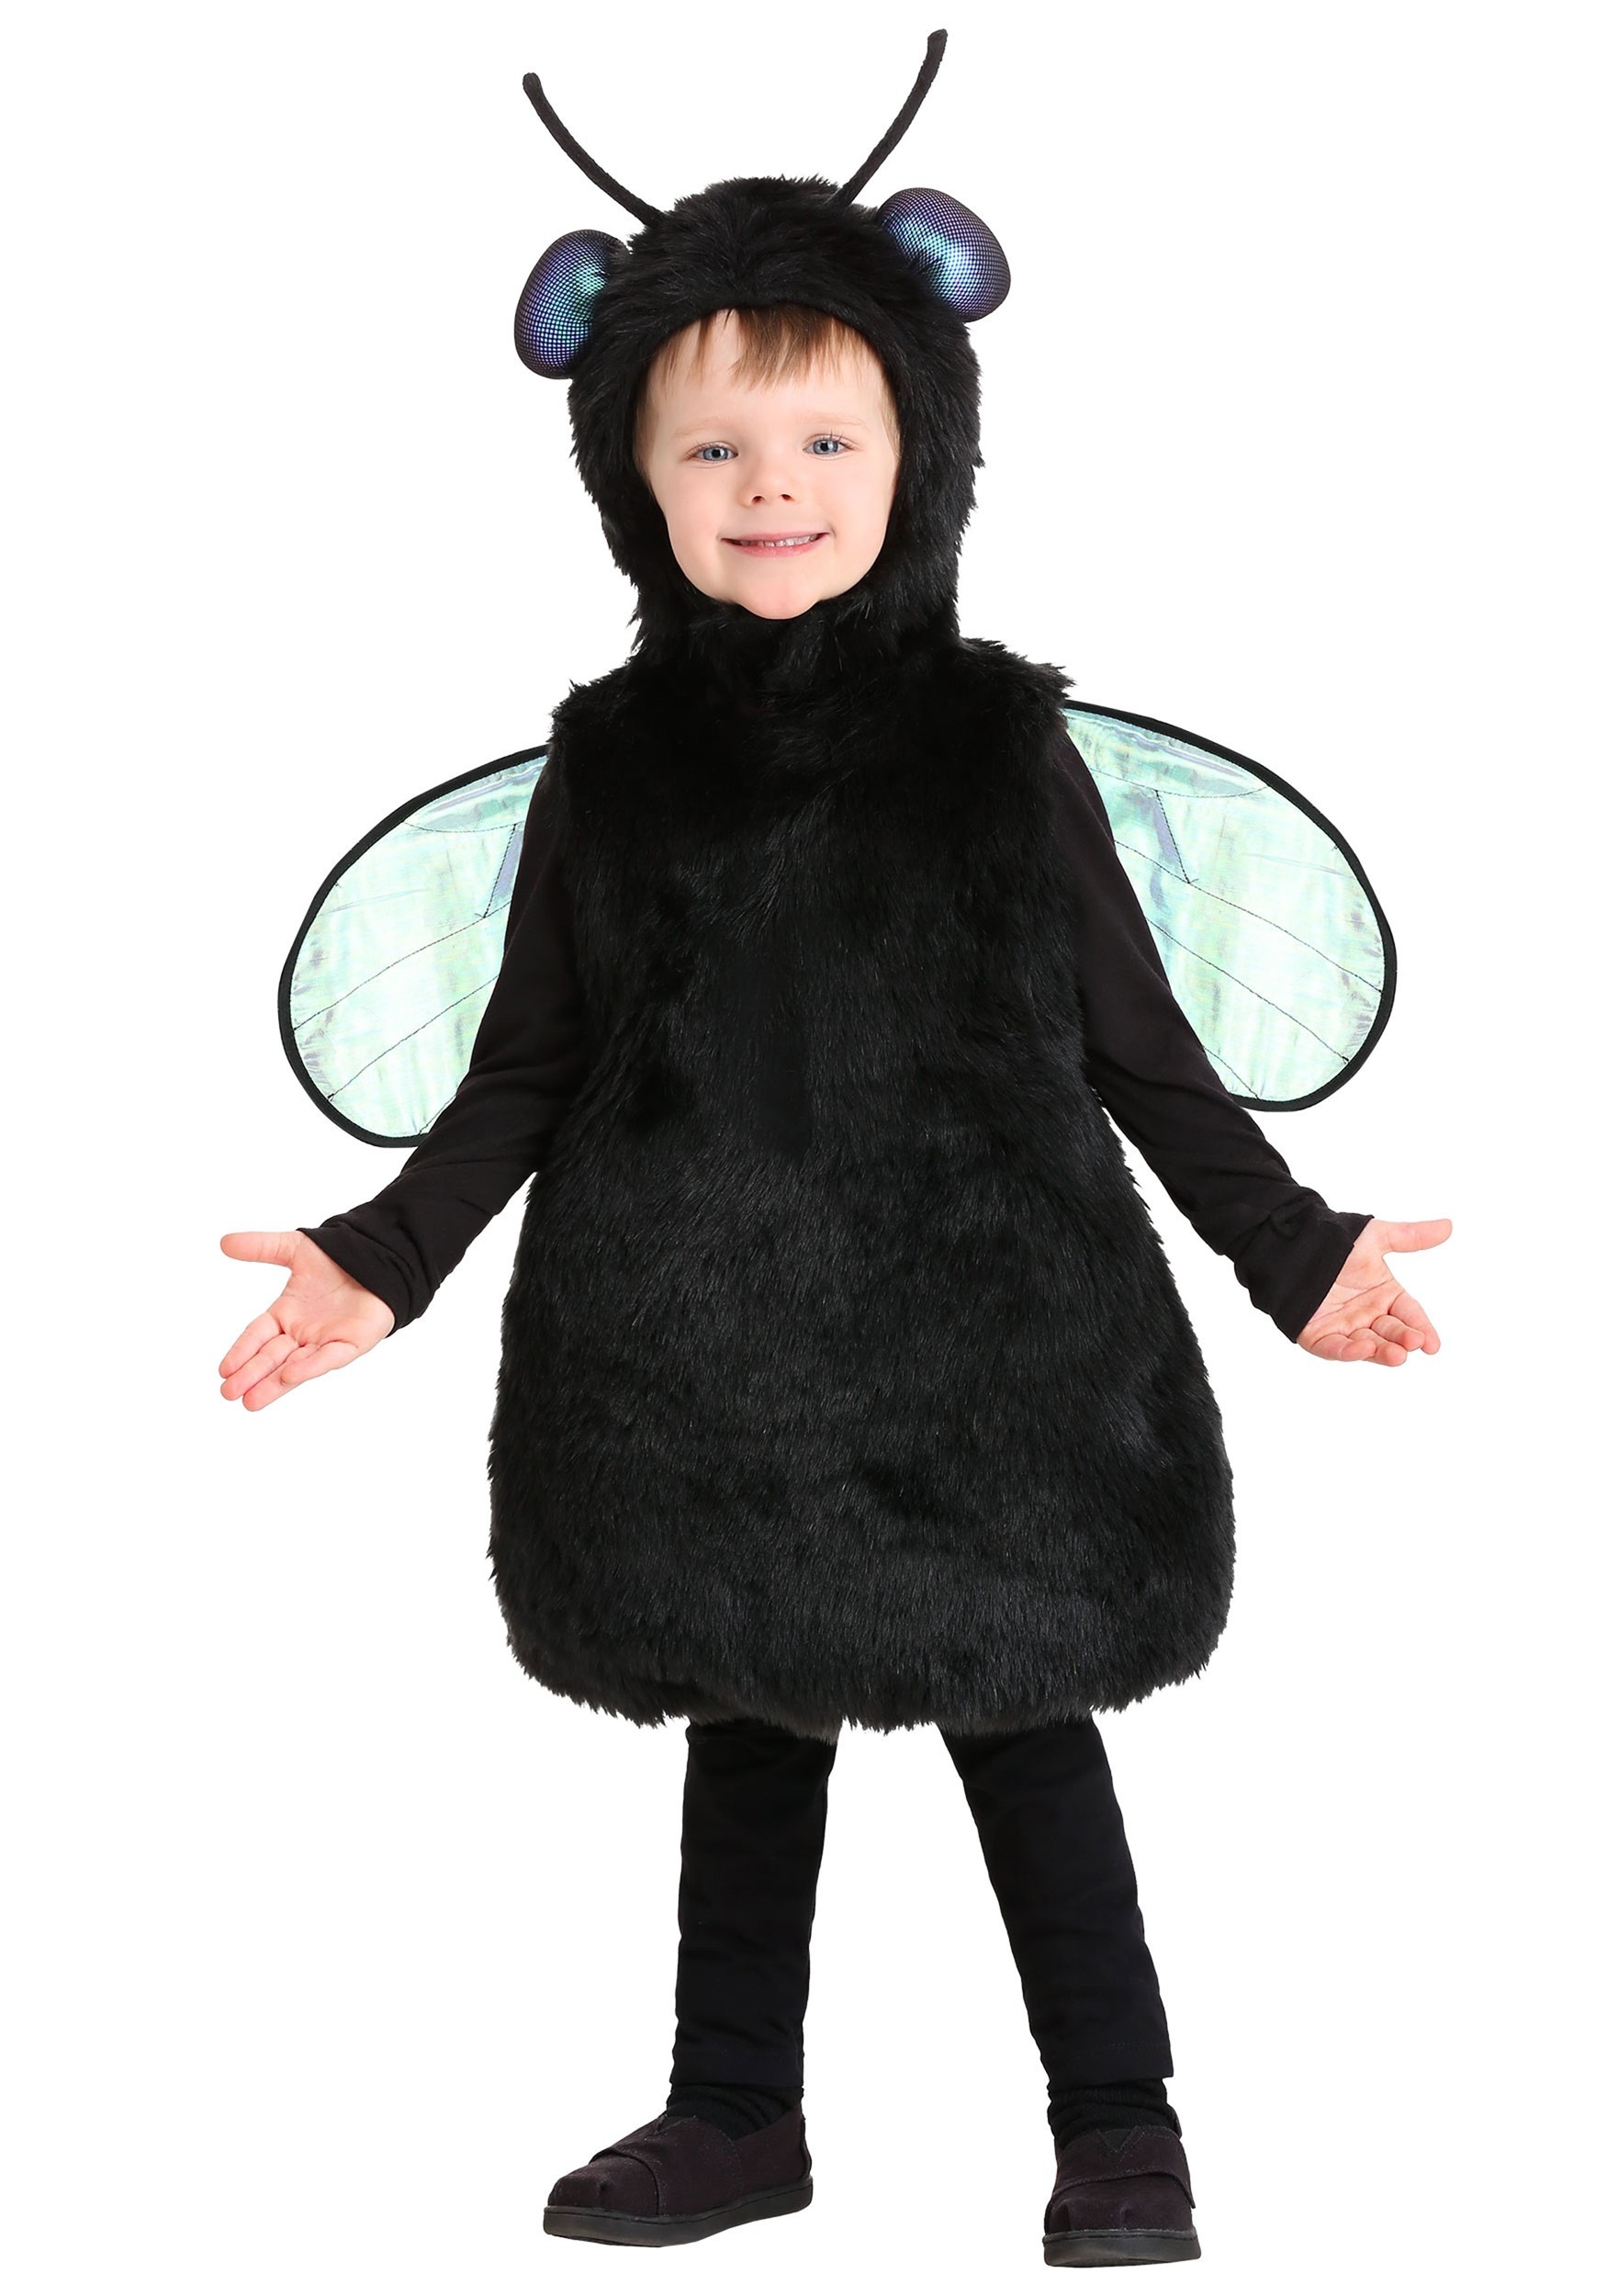 Photos - Fancy Dress Fly FUN Costumes Black  Toddler Costume | Insect Costumes Black/Blue FU 